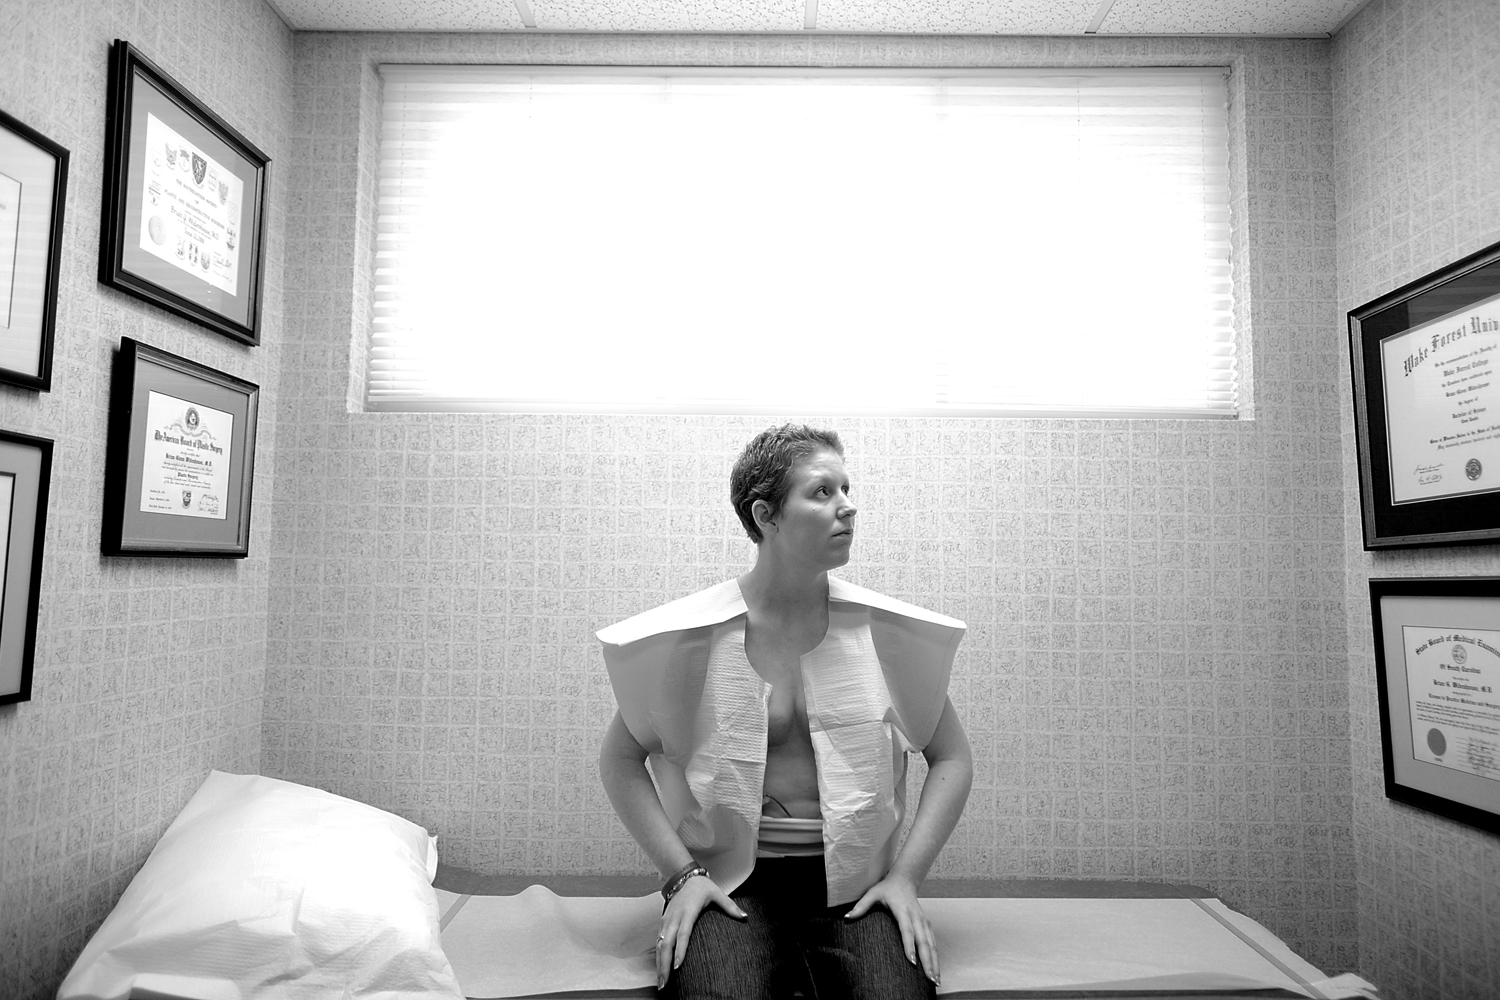 ReconstructionFirst Place, Portrait / Personality. U.S. Air Force Master Sergeant Keri Whitehead waits for a post-surgery exam at her plastic surgeon's office in Charleston, S.C. Keri underwent the first of three reconstructive surgeries after her battle with breast cancer. In the first surgery the doctors removed all of the breast tissue from Keri's left breast and then placed tissue expanders into both breast to allow stretching of the skin for future placement of breast implants. March 31, 2011.